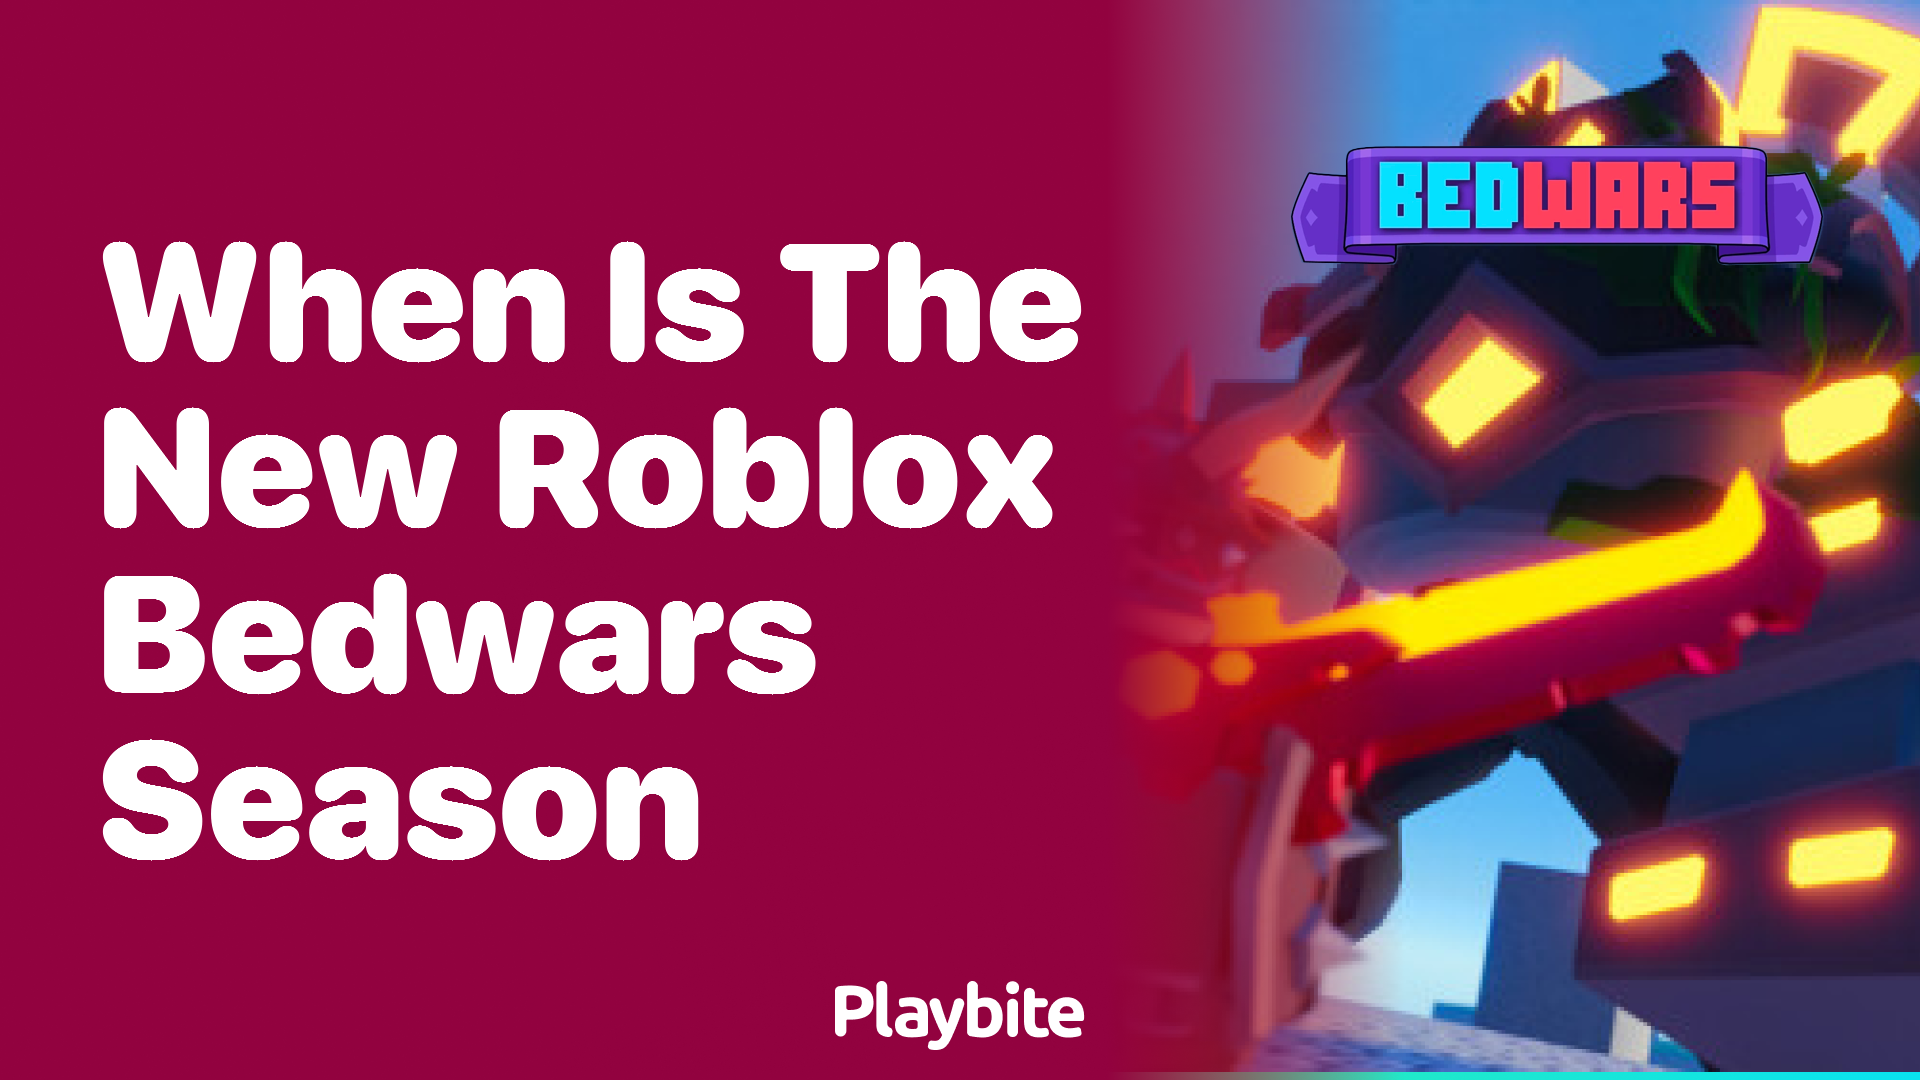 When is the New Roblox Bedwars Season Starting?